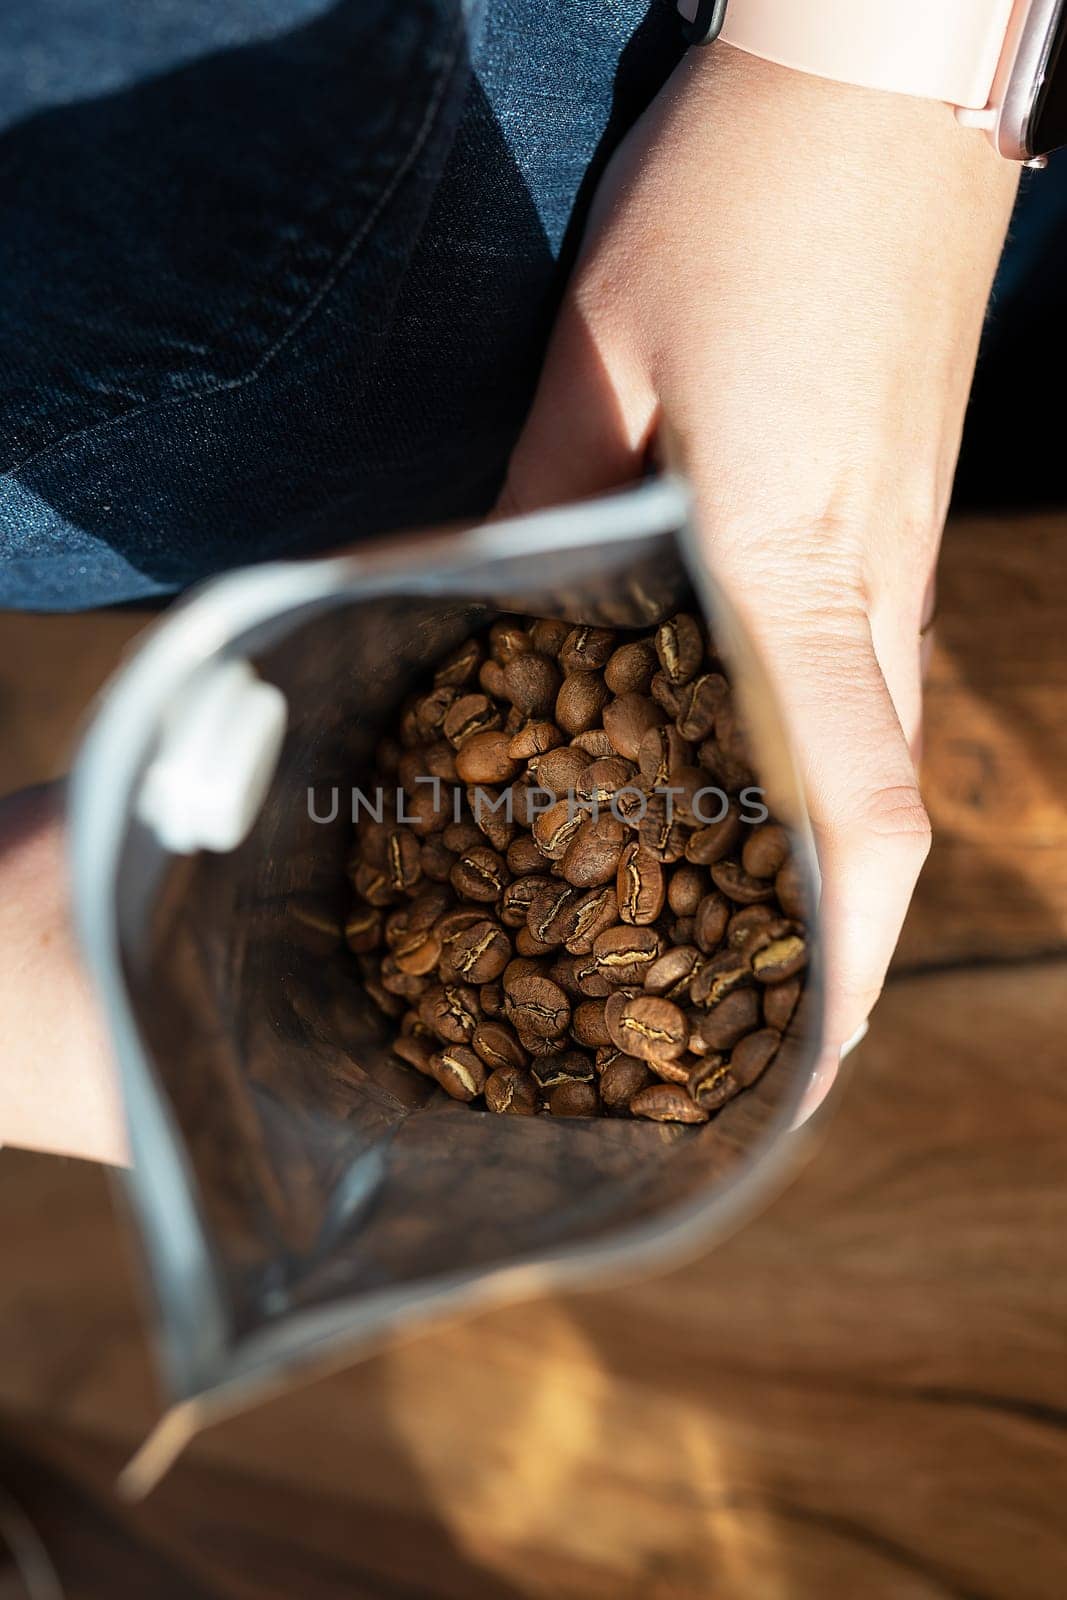 The roasted coffee bean is packaged in a bag that the barista holds in his hands. Top view, coffee preparation concept